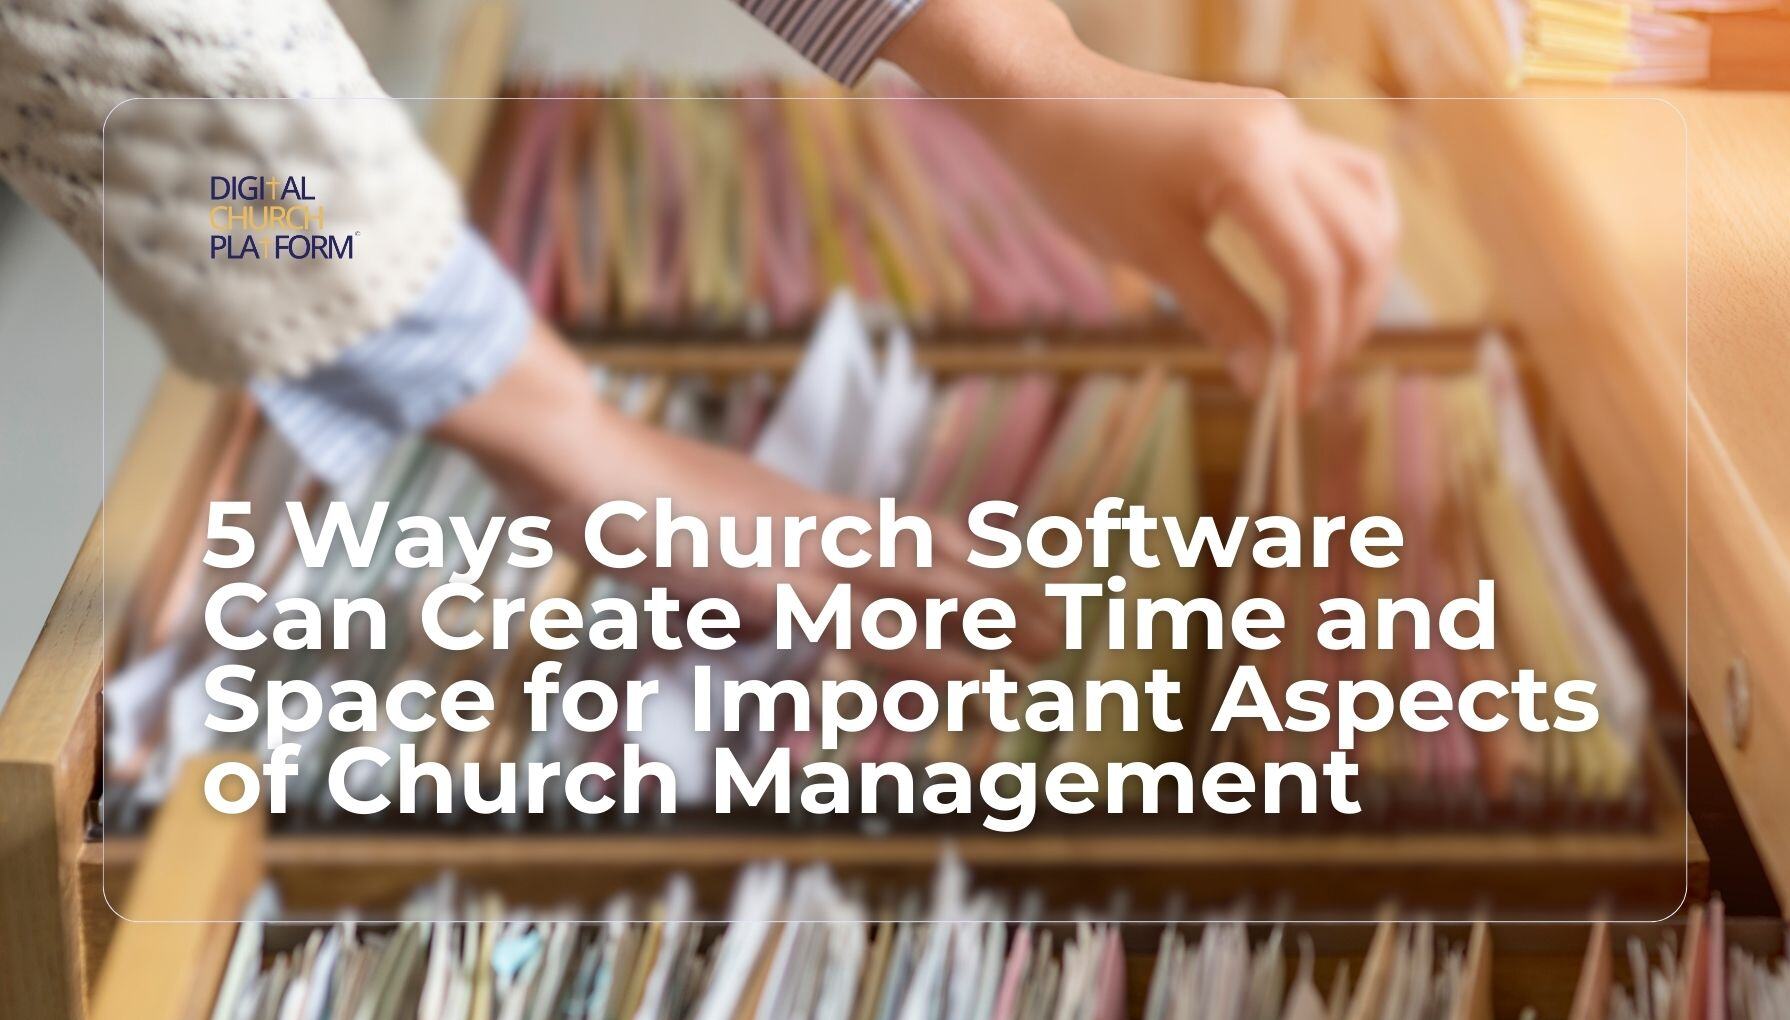 5 Ways Church Software Can Create More Time and Space for Important Aspects of Church Management